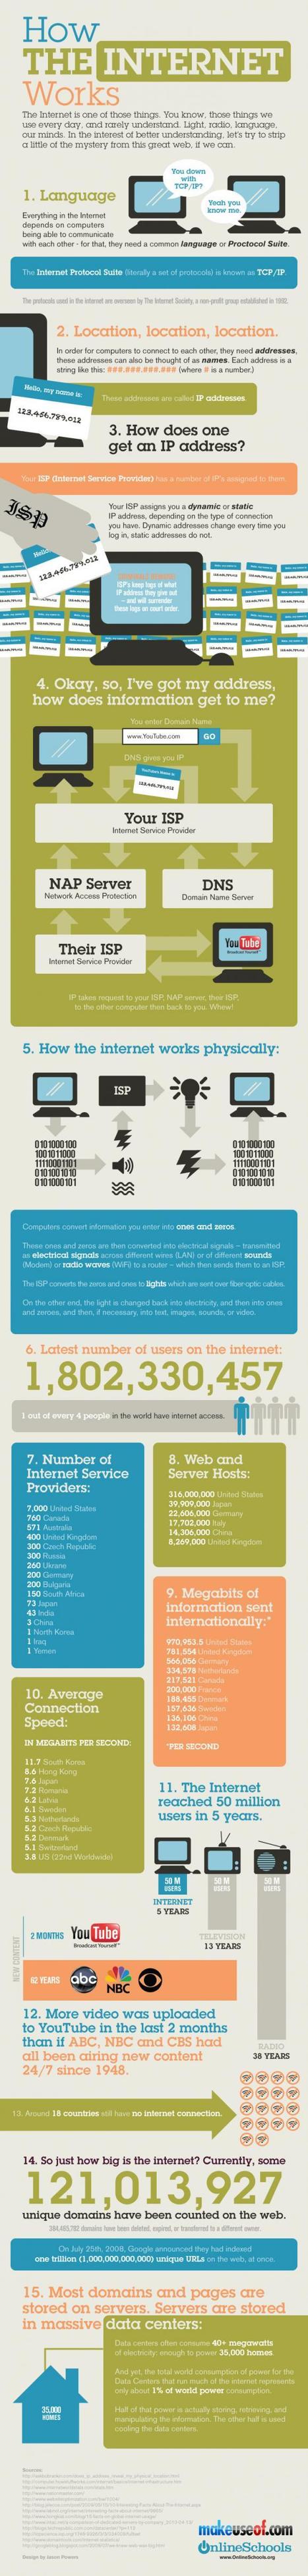 How the internet works [Infographic] | 21st Century Learning and Teaching | Scoop.it